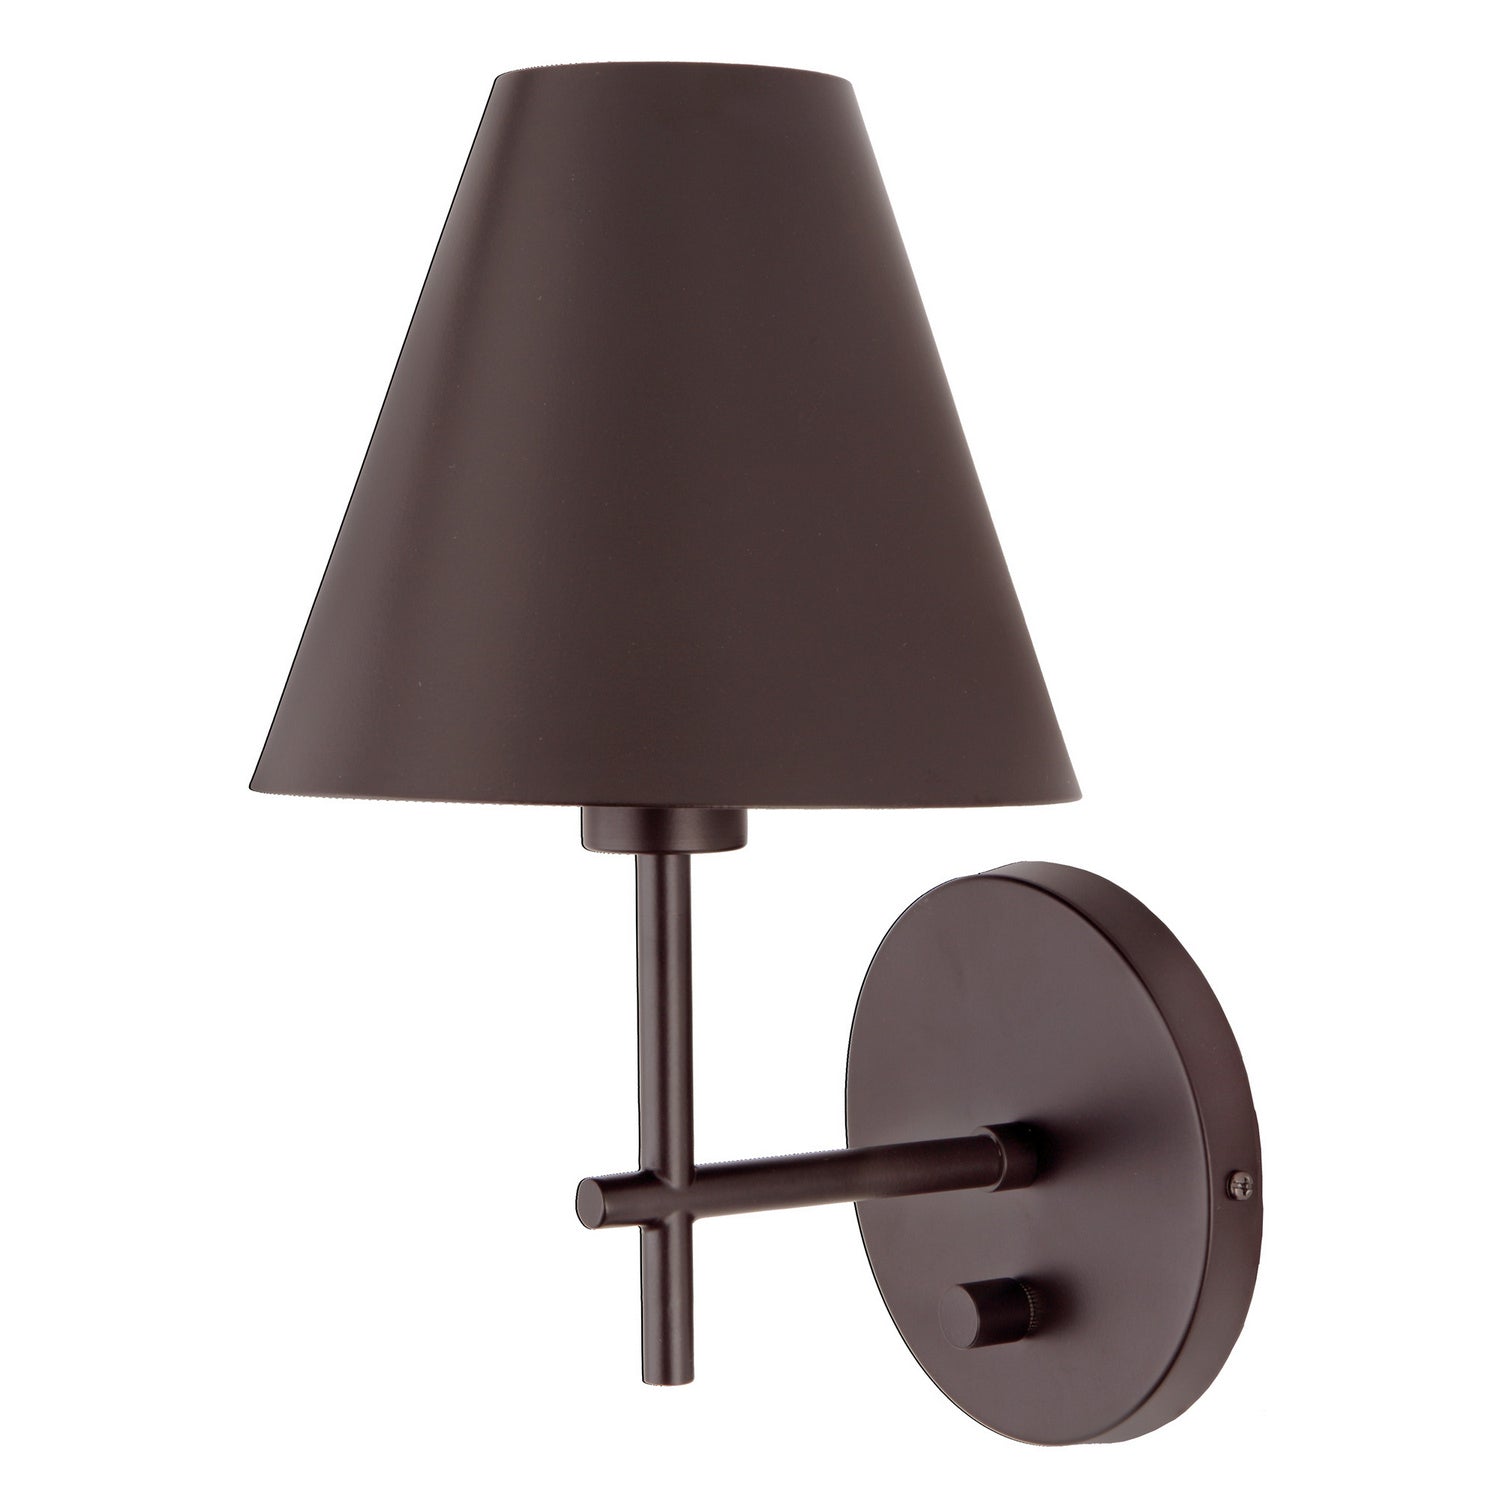 JVI Designs - 437-08 - One Light Wall Sconce - Somerset - Oil Rubbed Bronze